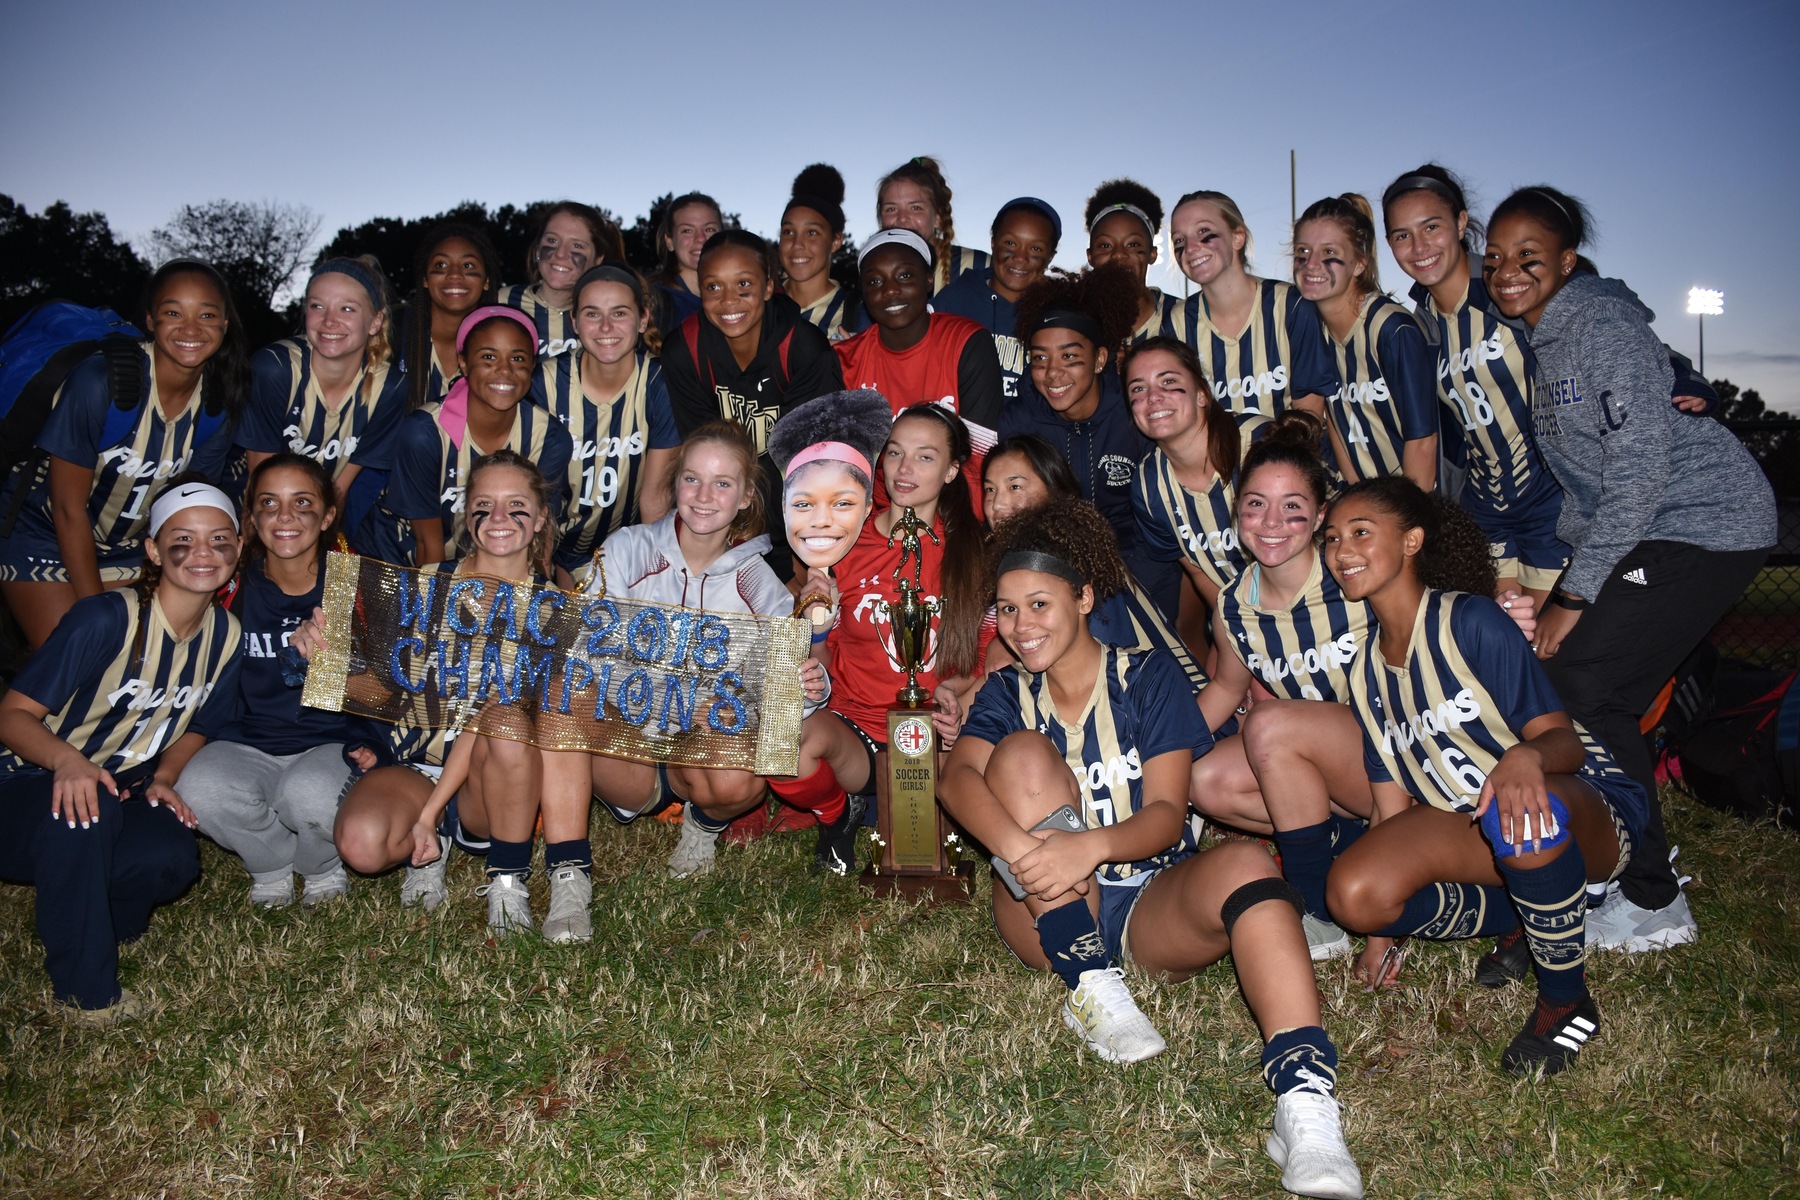 Girls’ soccer Top 10: WCAC champion Good Counsel is the new No. 1 in rankings shakeup